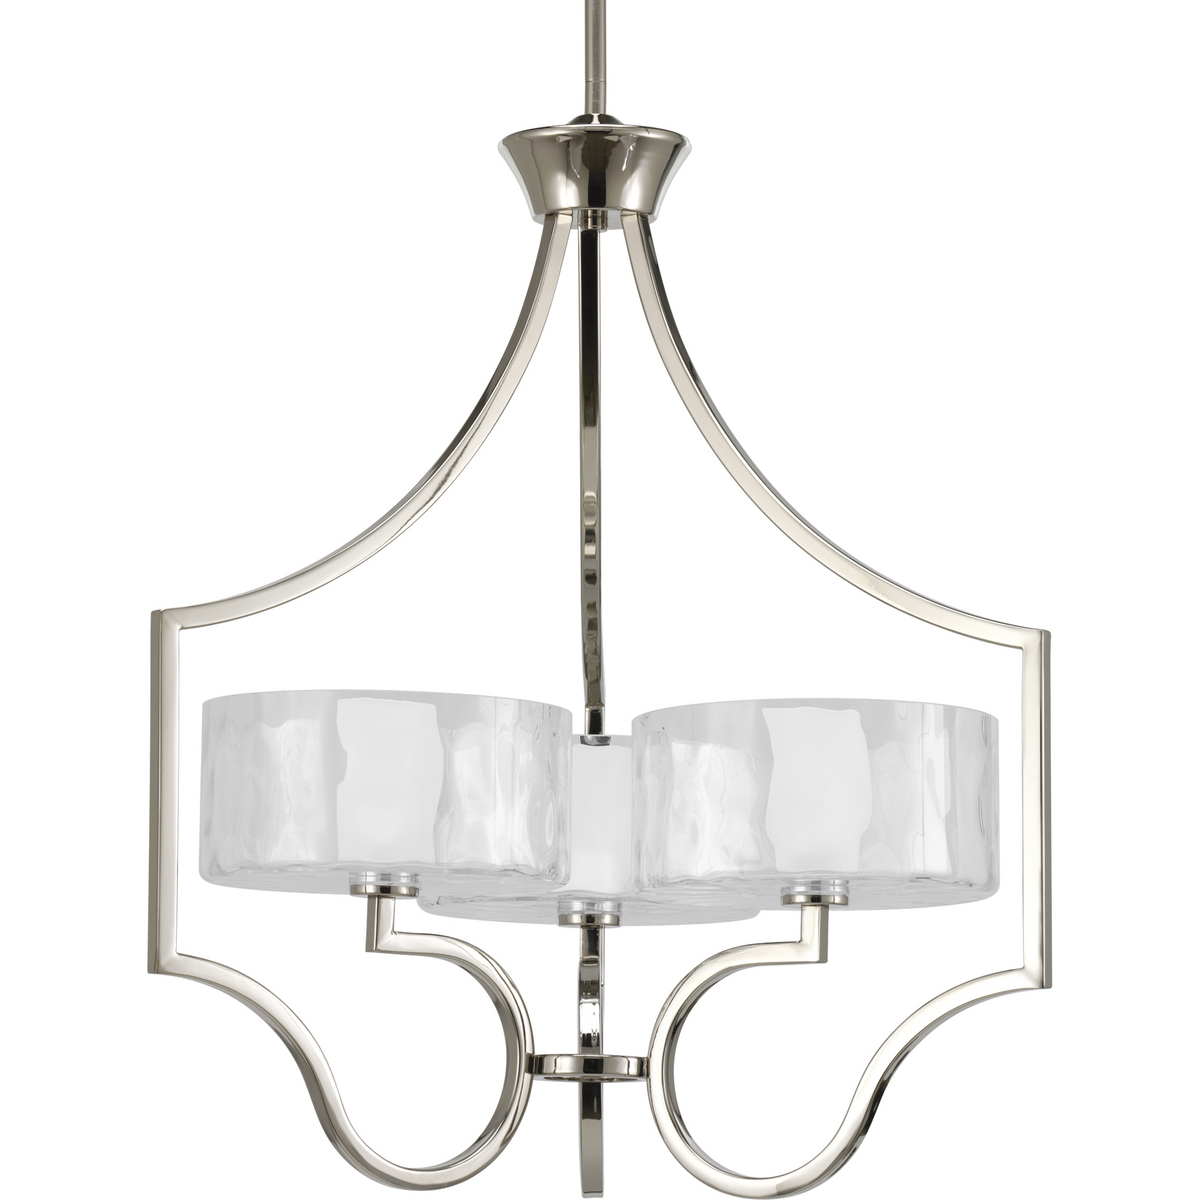 Three-light chandelier. Caress features a chic, sophisticated three-light chandelier featuring a Polished Nickel metal frame with layered glass diffusers to cast a glimmering light. An outer shade of clear, water glass adds rich texture and playful r...